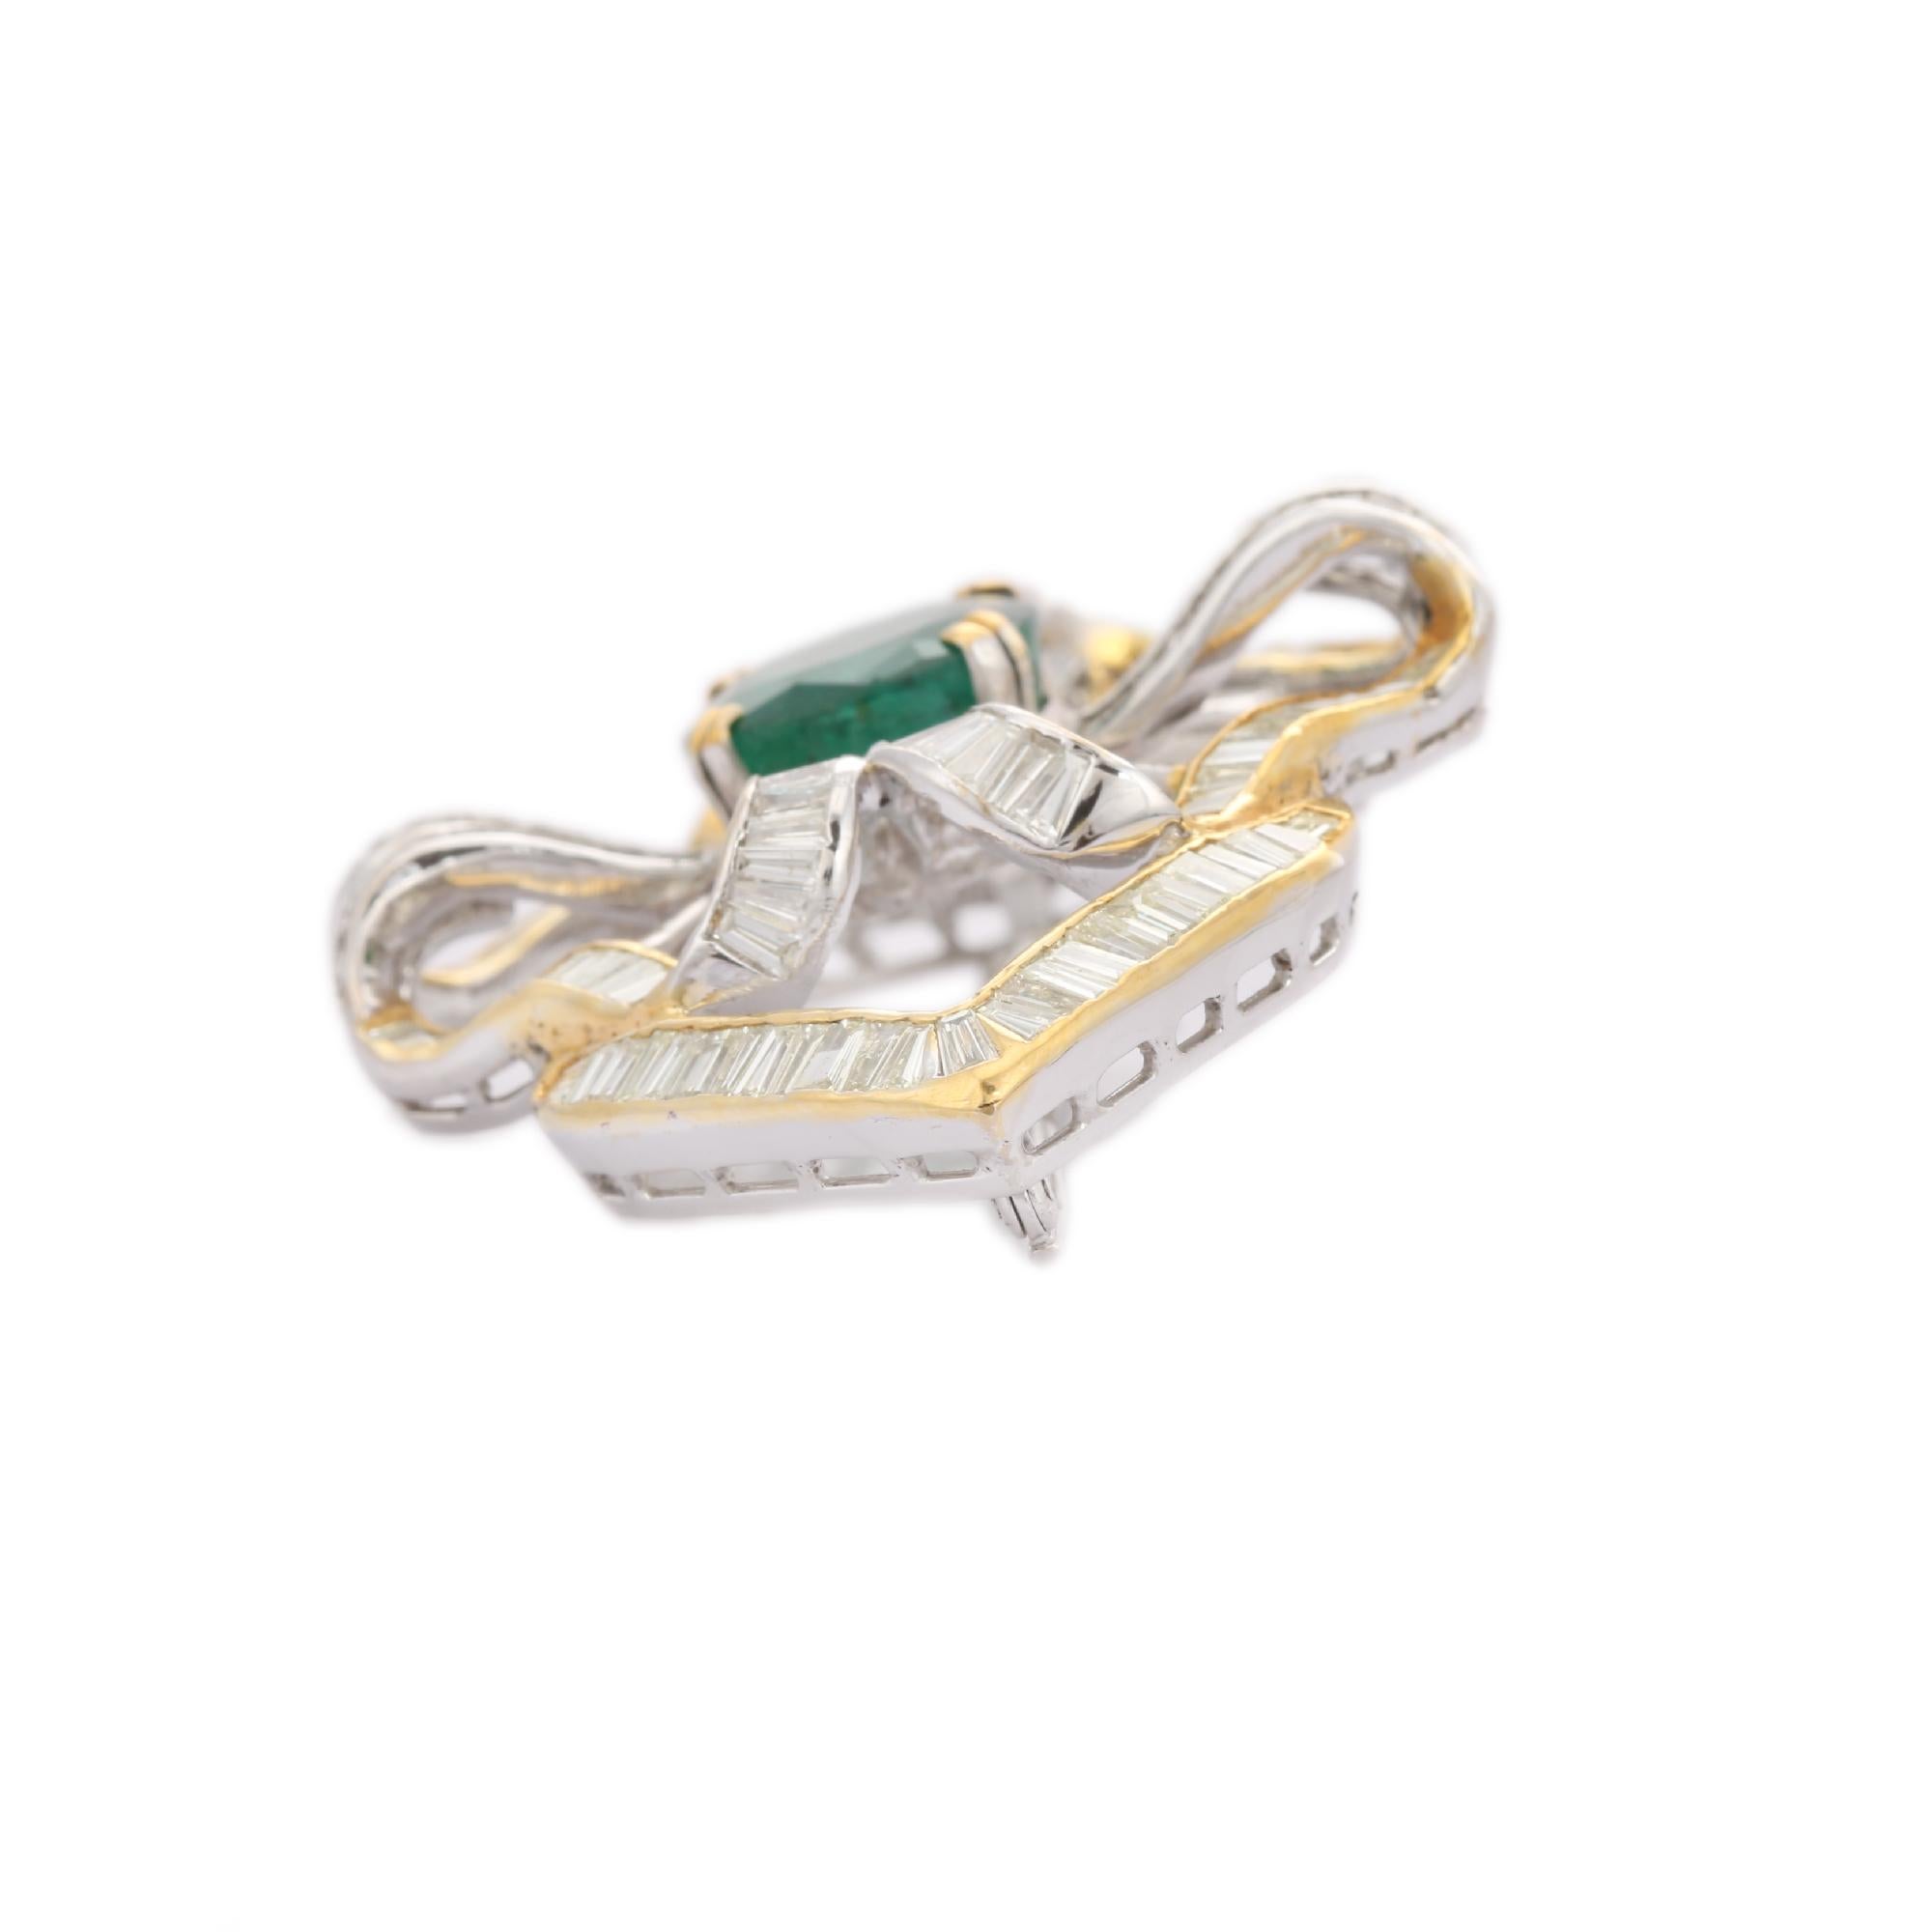 Contemporary 18k Solid White Gold 11.61 CTW Emerald and Diamond Floral Bow Brooch Pin For Sale